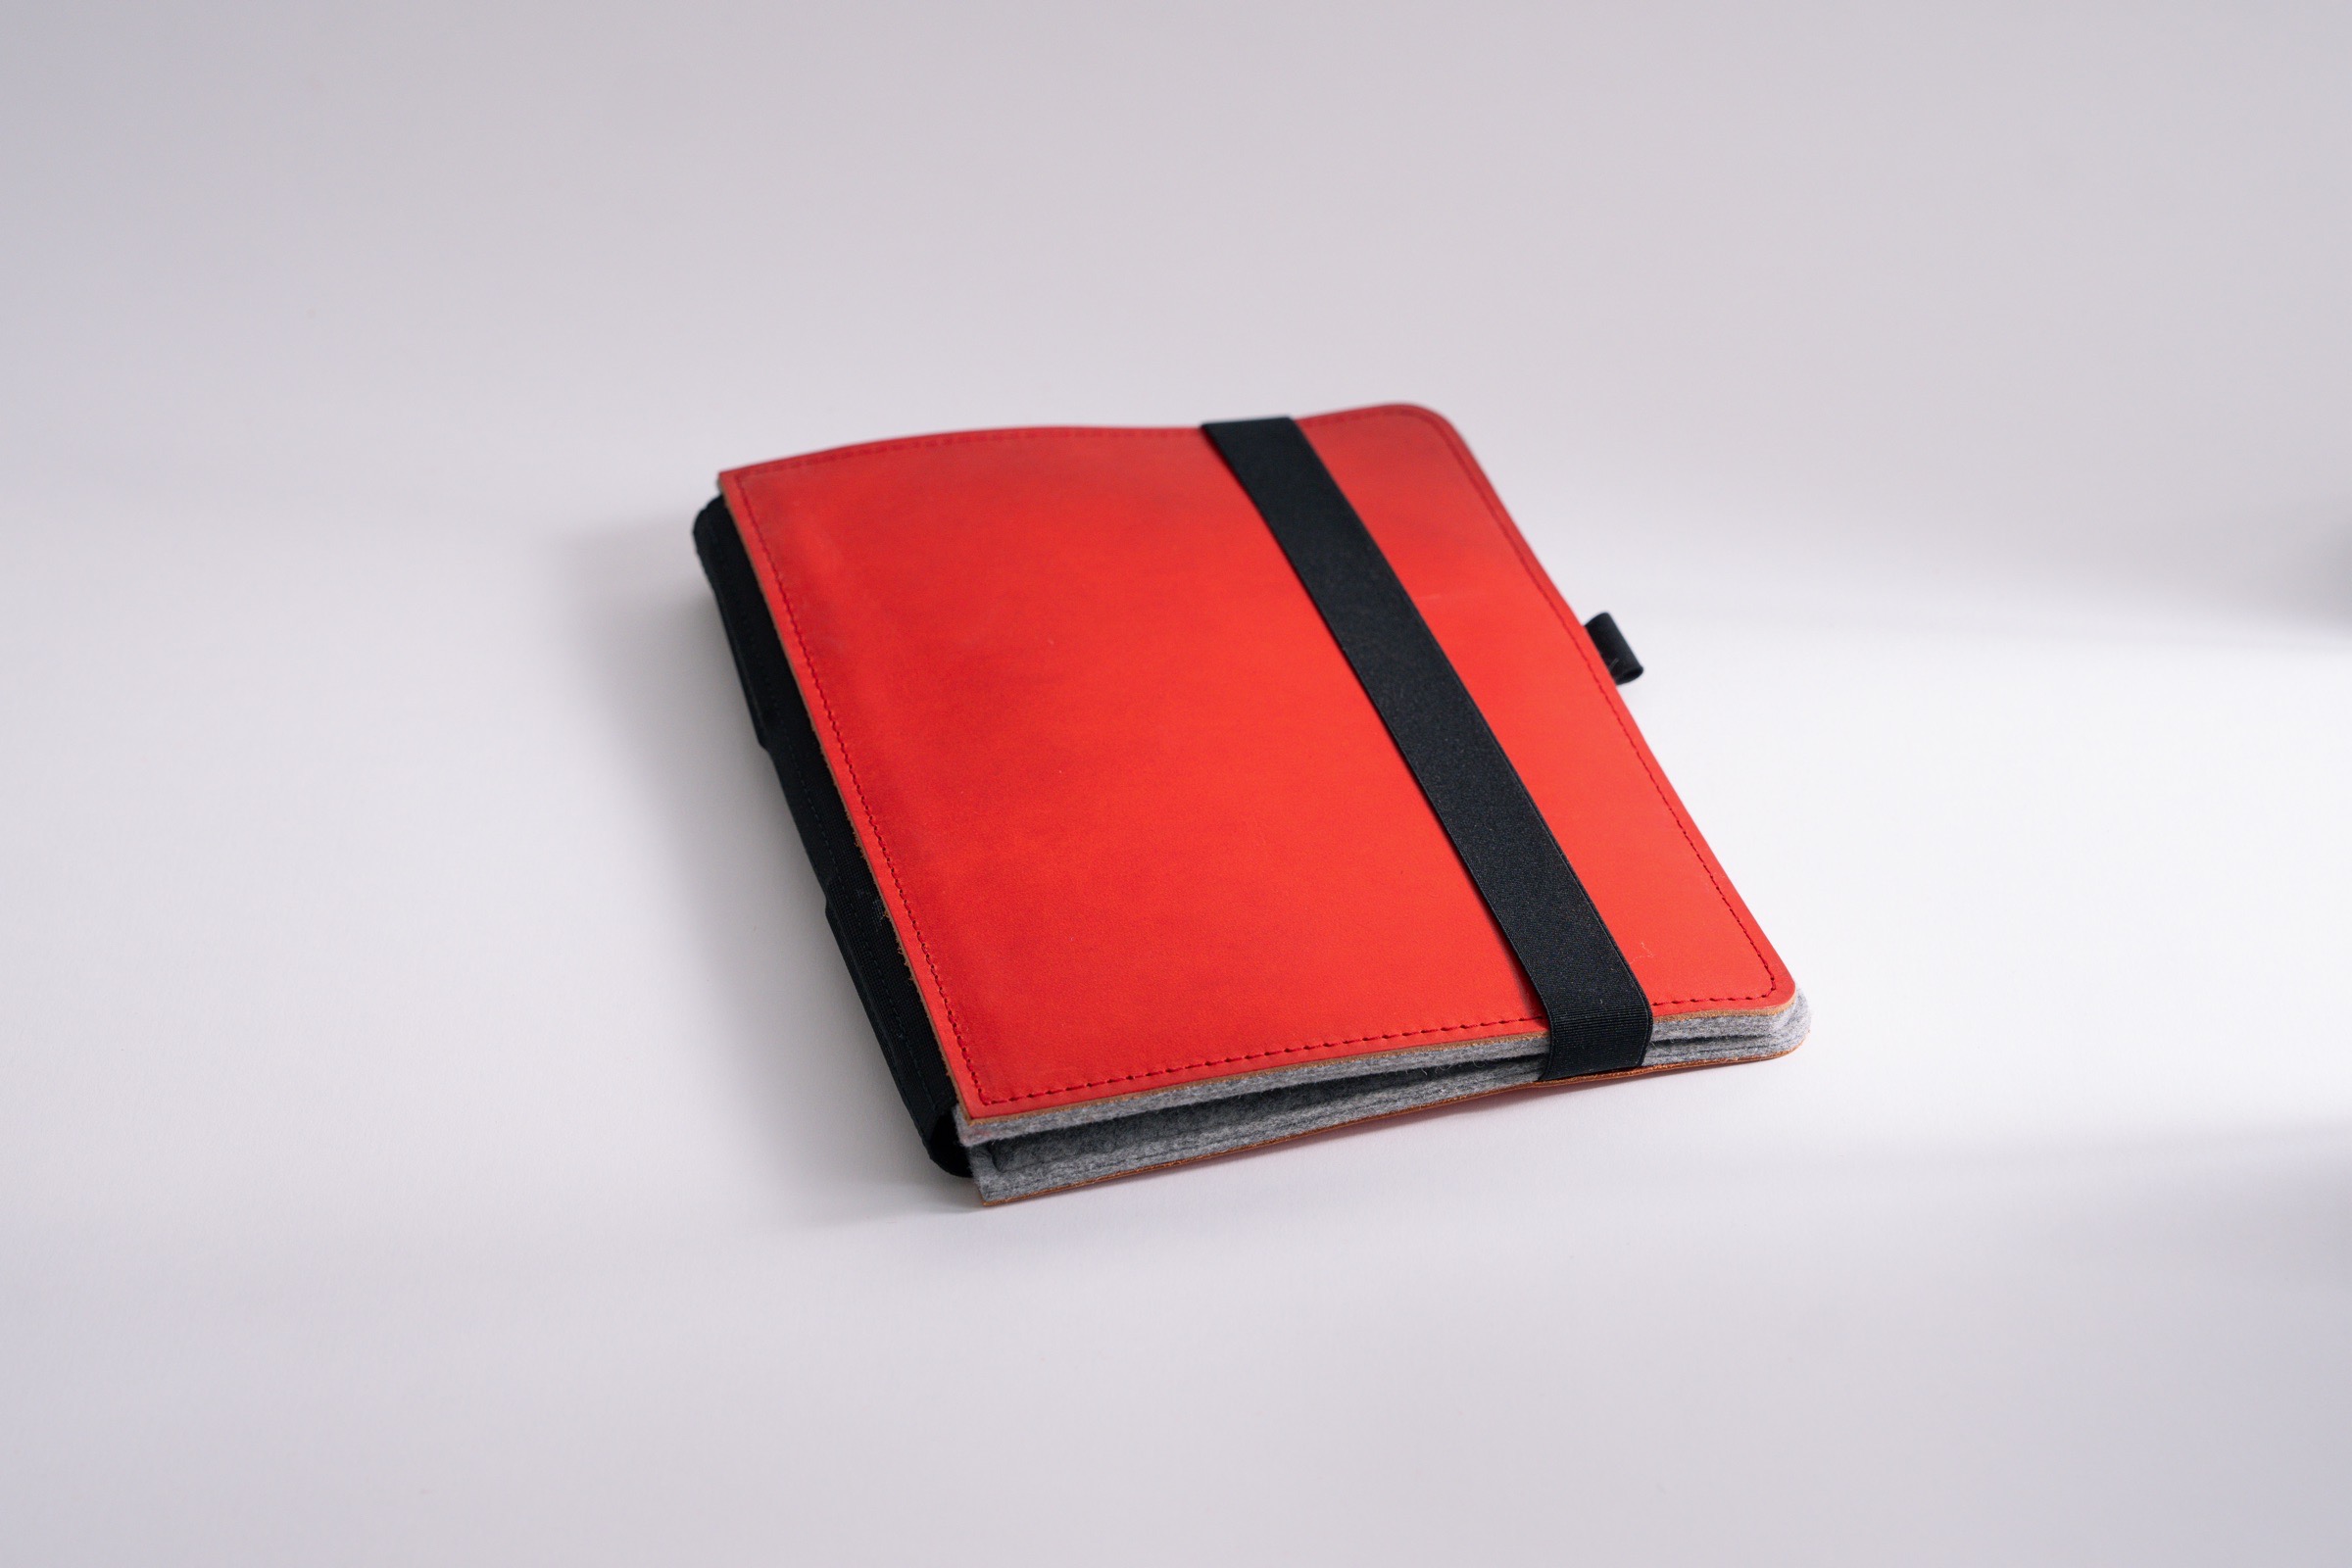 Taschenbegleiter LTD_028 in light gray felt inside and red felt outside, with inwardly offset clips to hold your notebooks an papers.